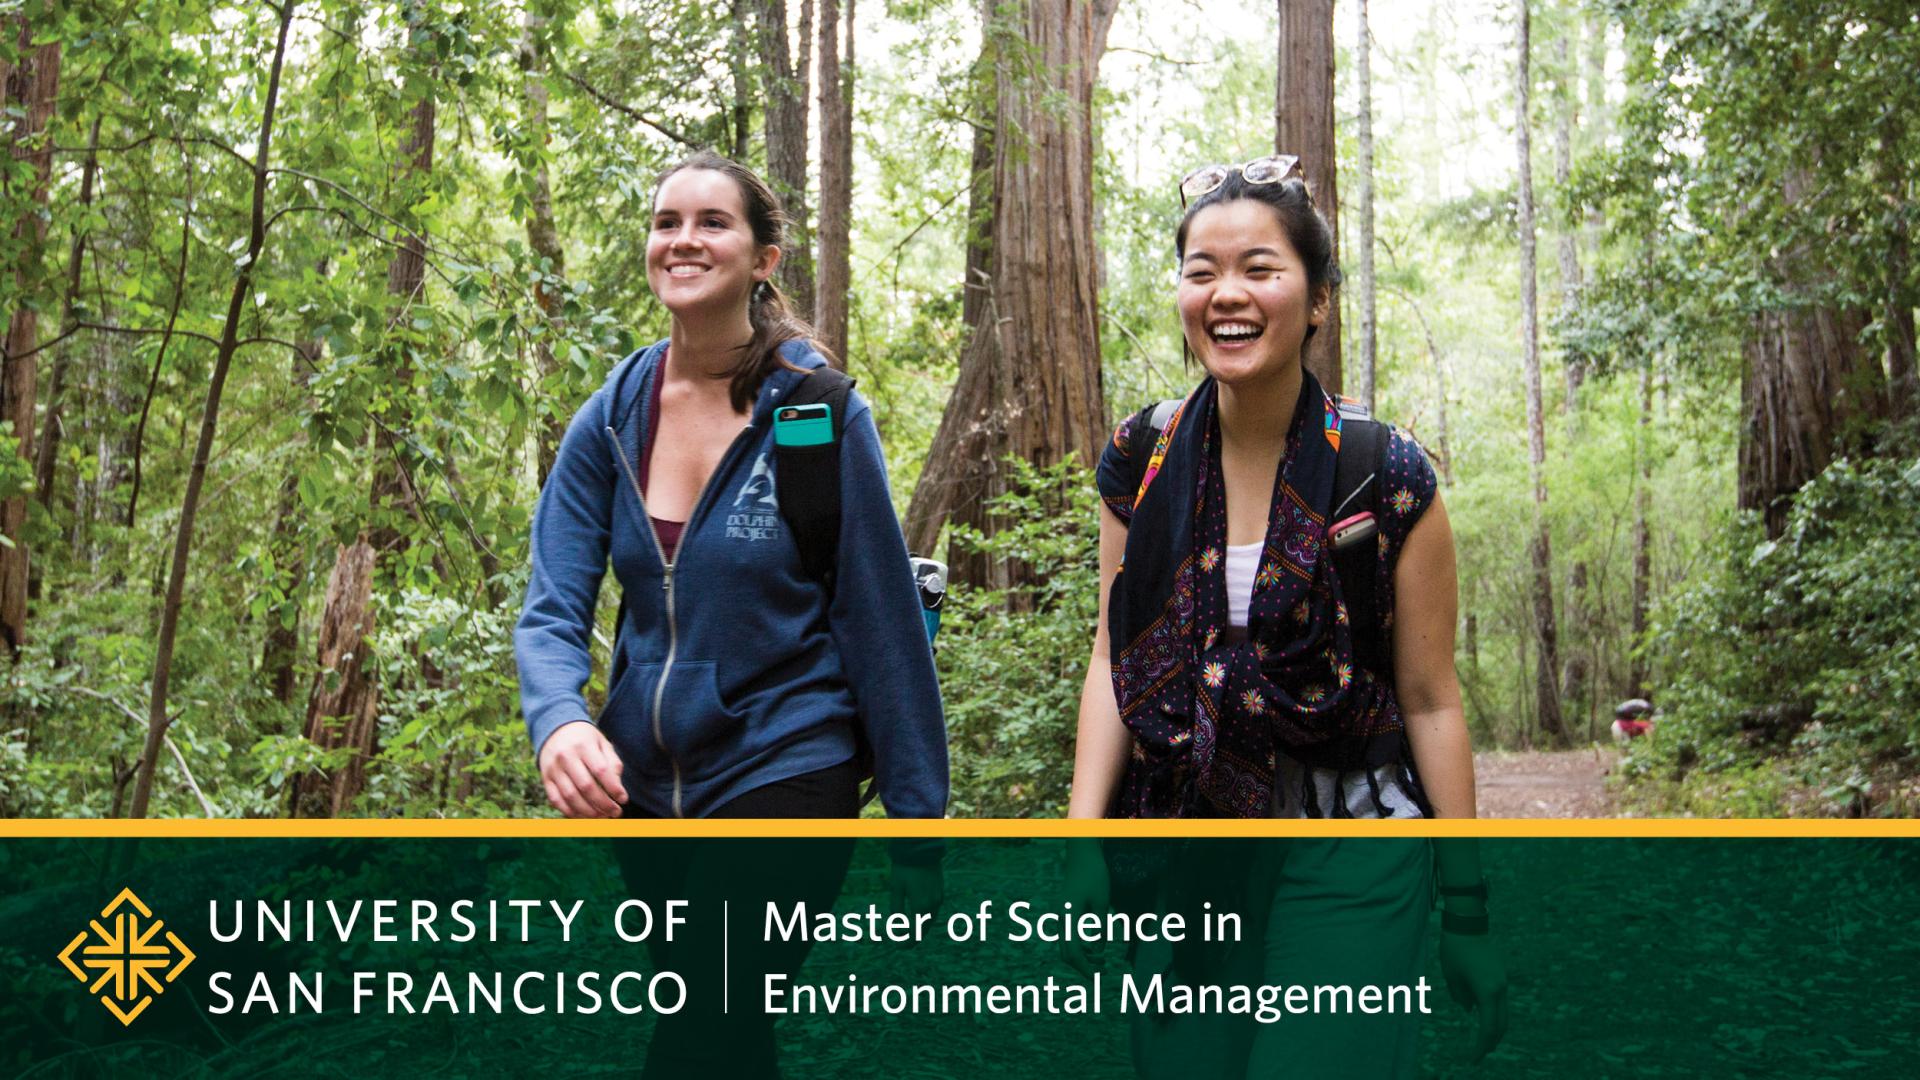 University of San Francisco Master of Science in Environmental Management